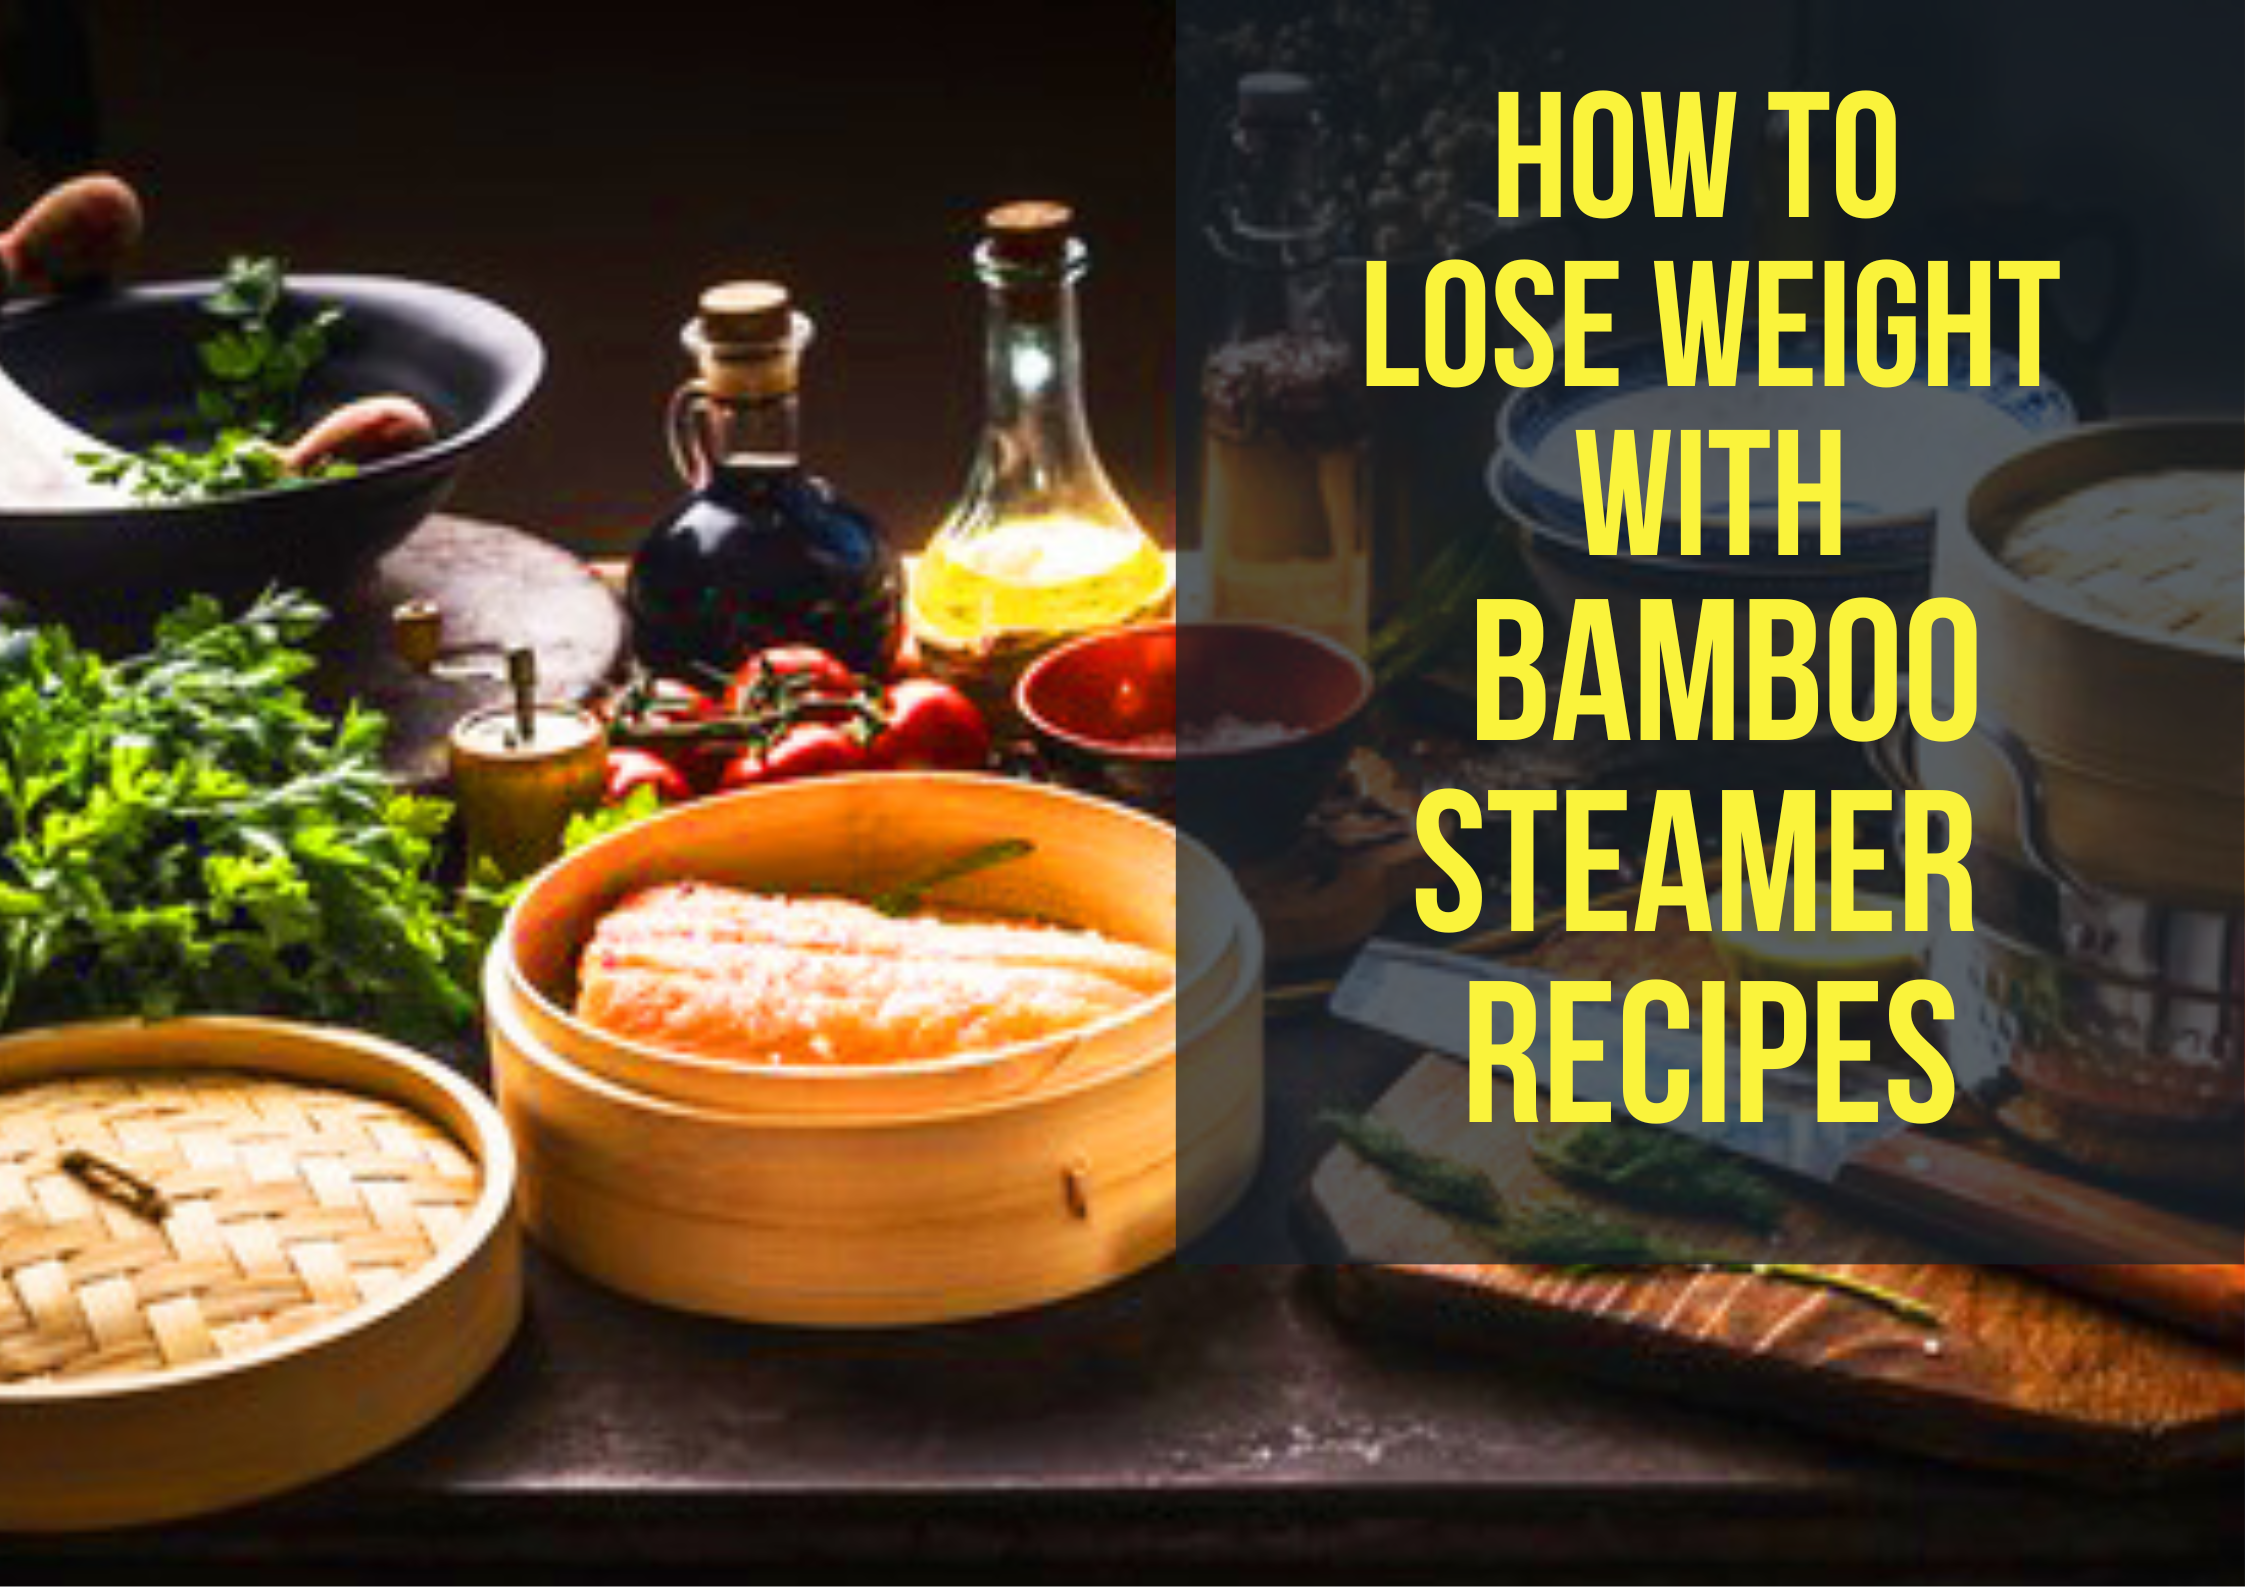 https://cdn.shopify.com/s/files/1/0459/8795/4845/articles/HOW_TO_LOSE_WEIGHT_WITH_BAMBOO_STEAMER_RECIPES.png?v=1679849756